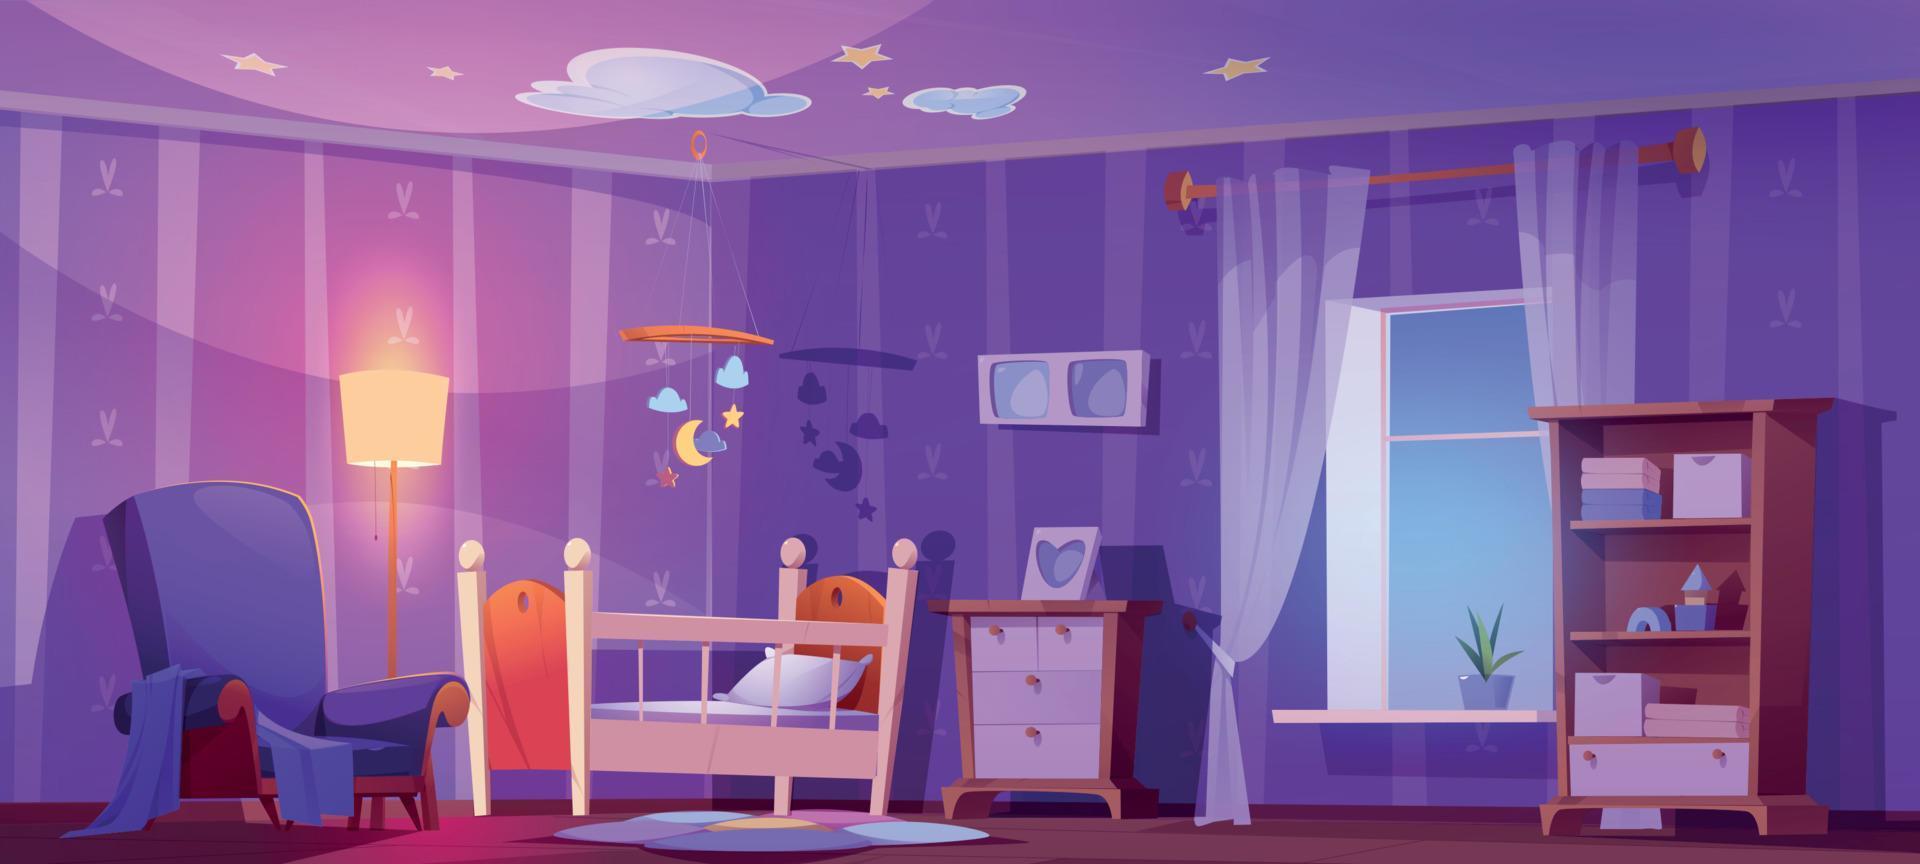 Nursery, baby room with cot bed, chair at night vector